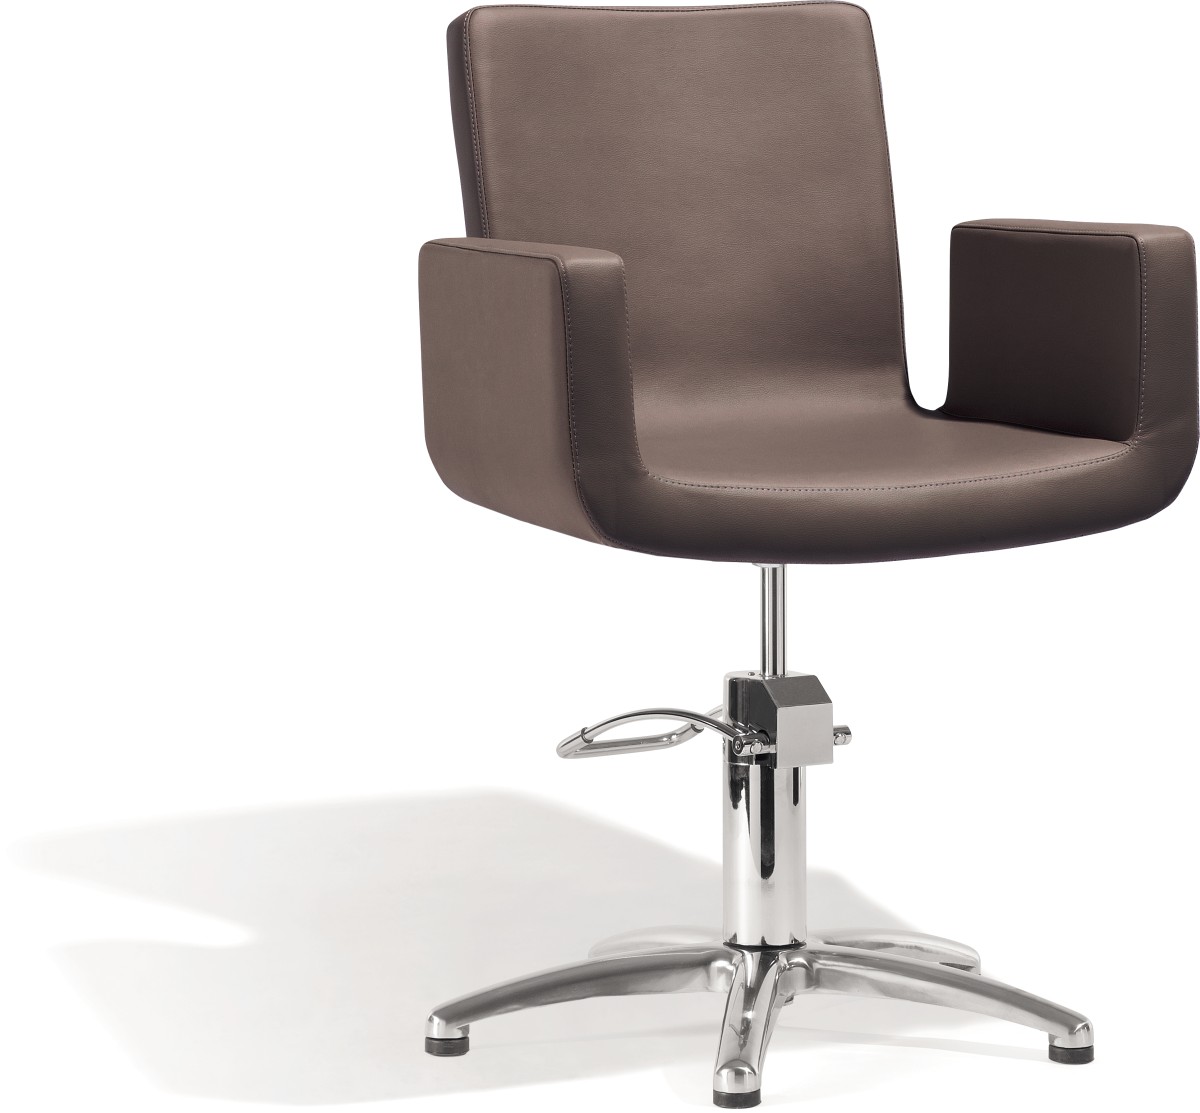  Sibel Attractio Styling Chair Brown / 5-Star-Base 